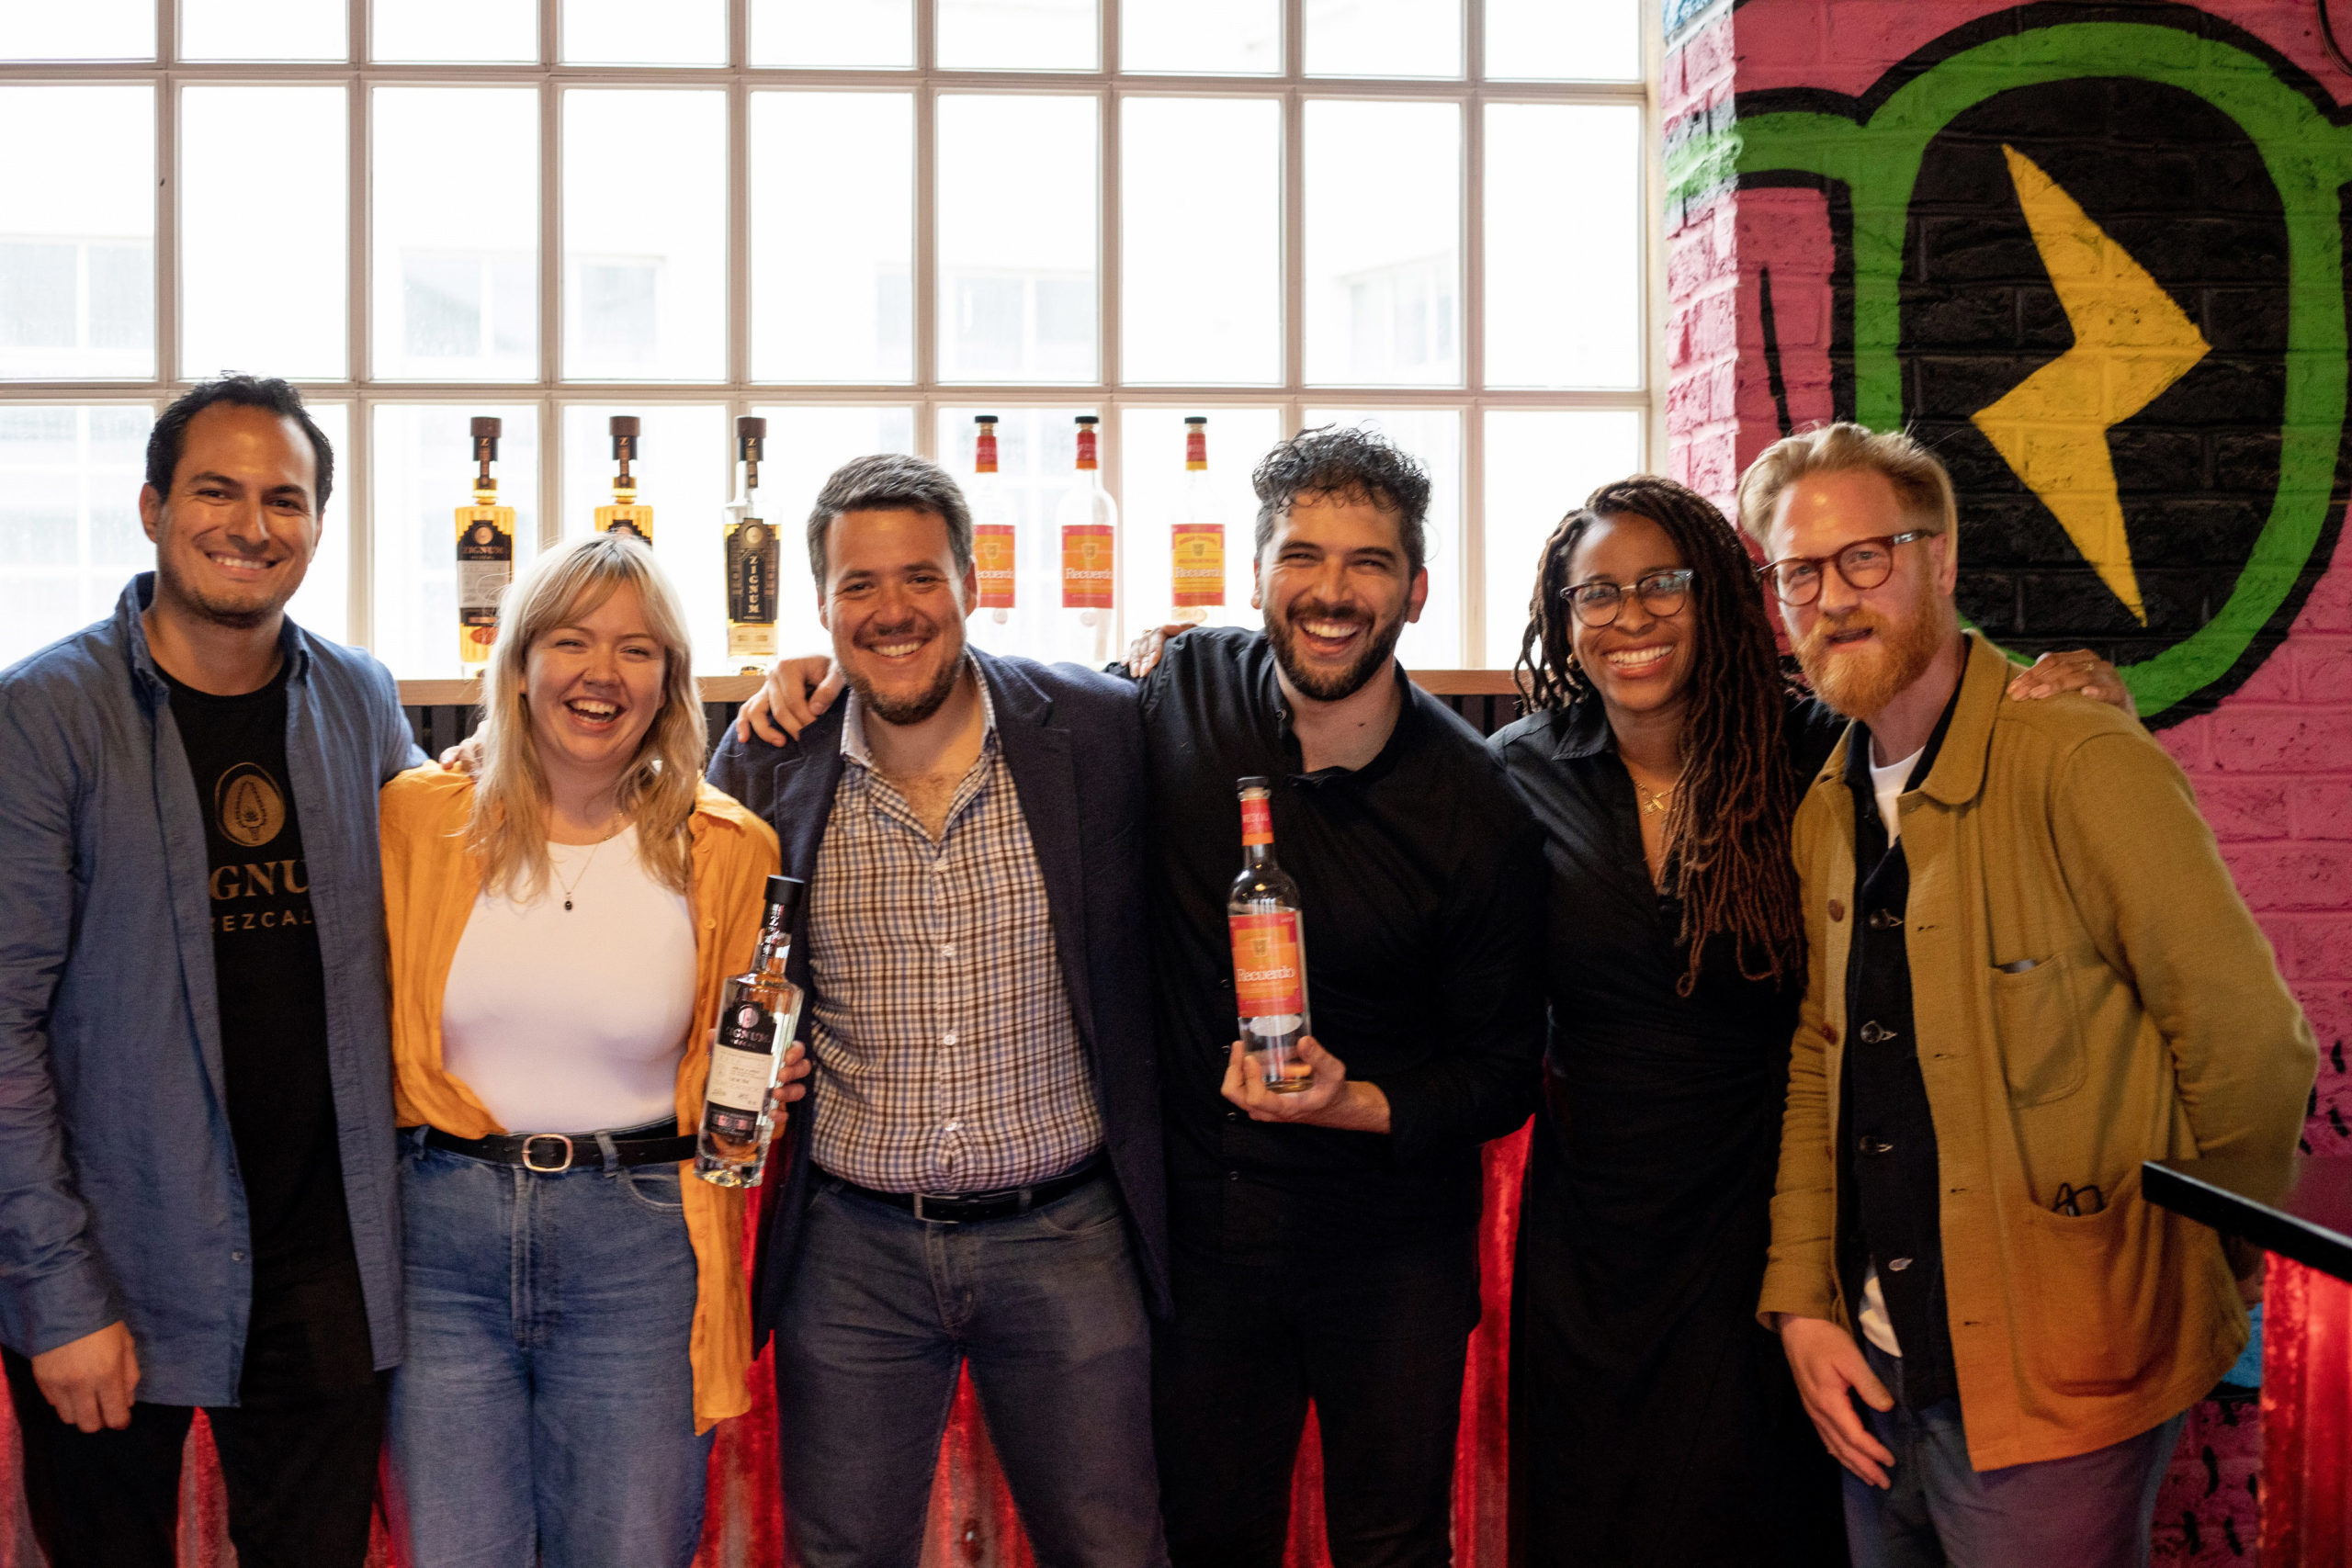 The winners and judges of Love Drinks' mezcal competition.